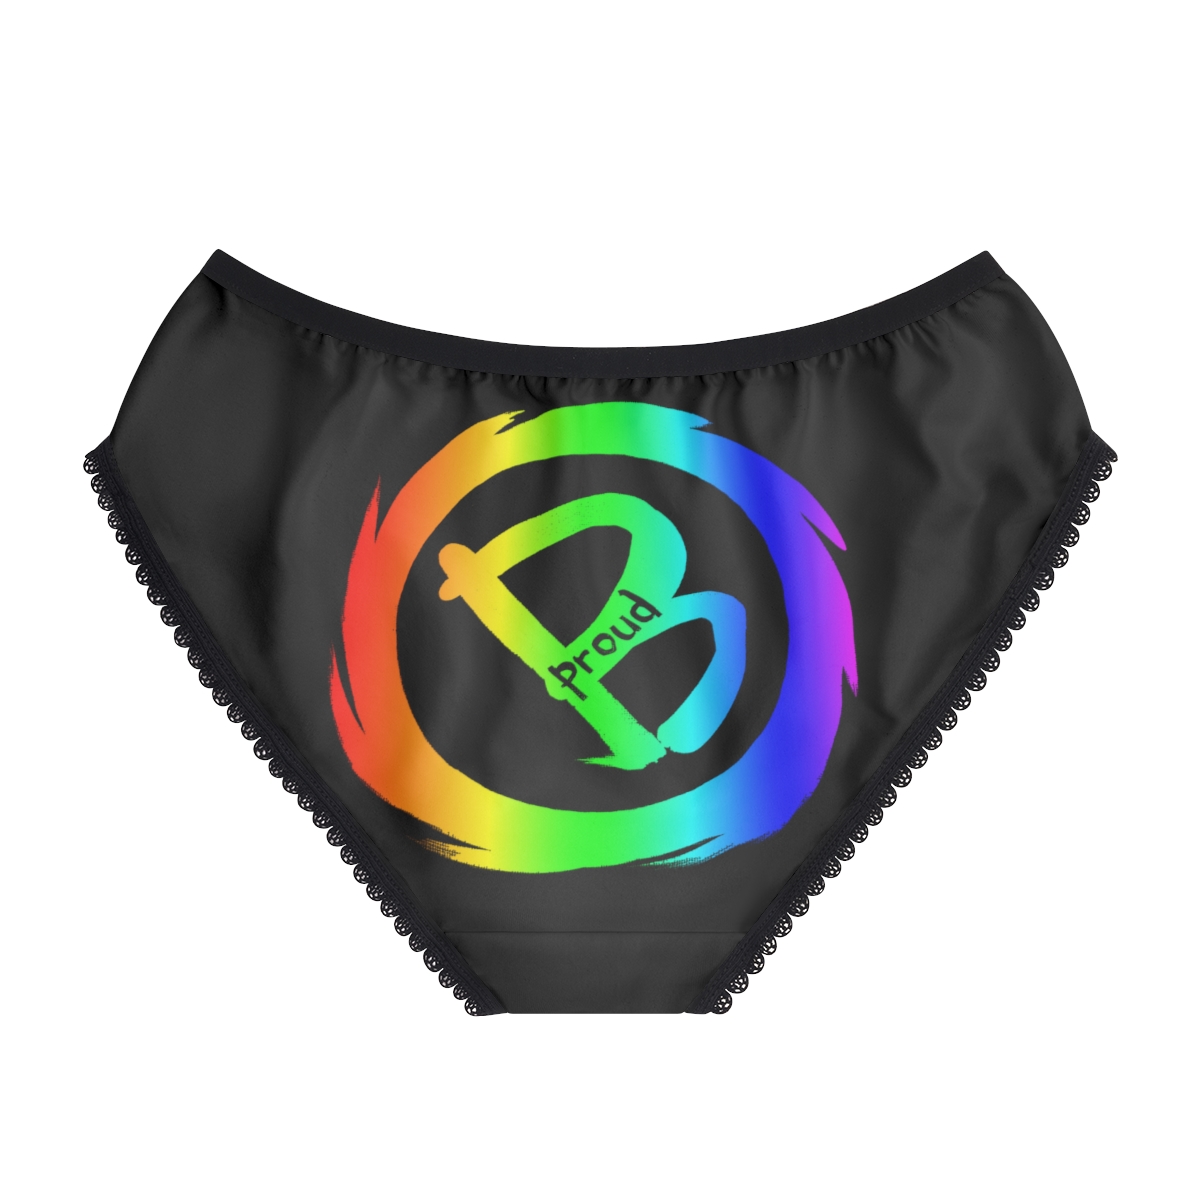 Frilly Briefs Rainbow B proud product thumbnail image